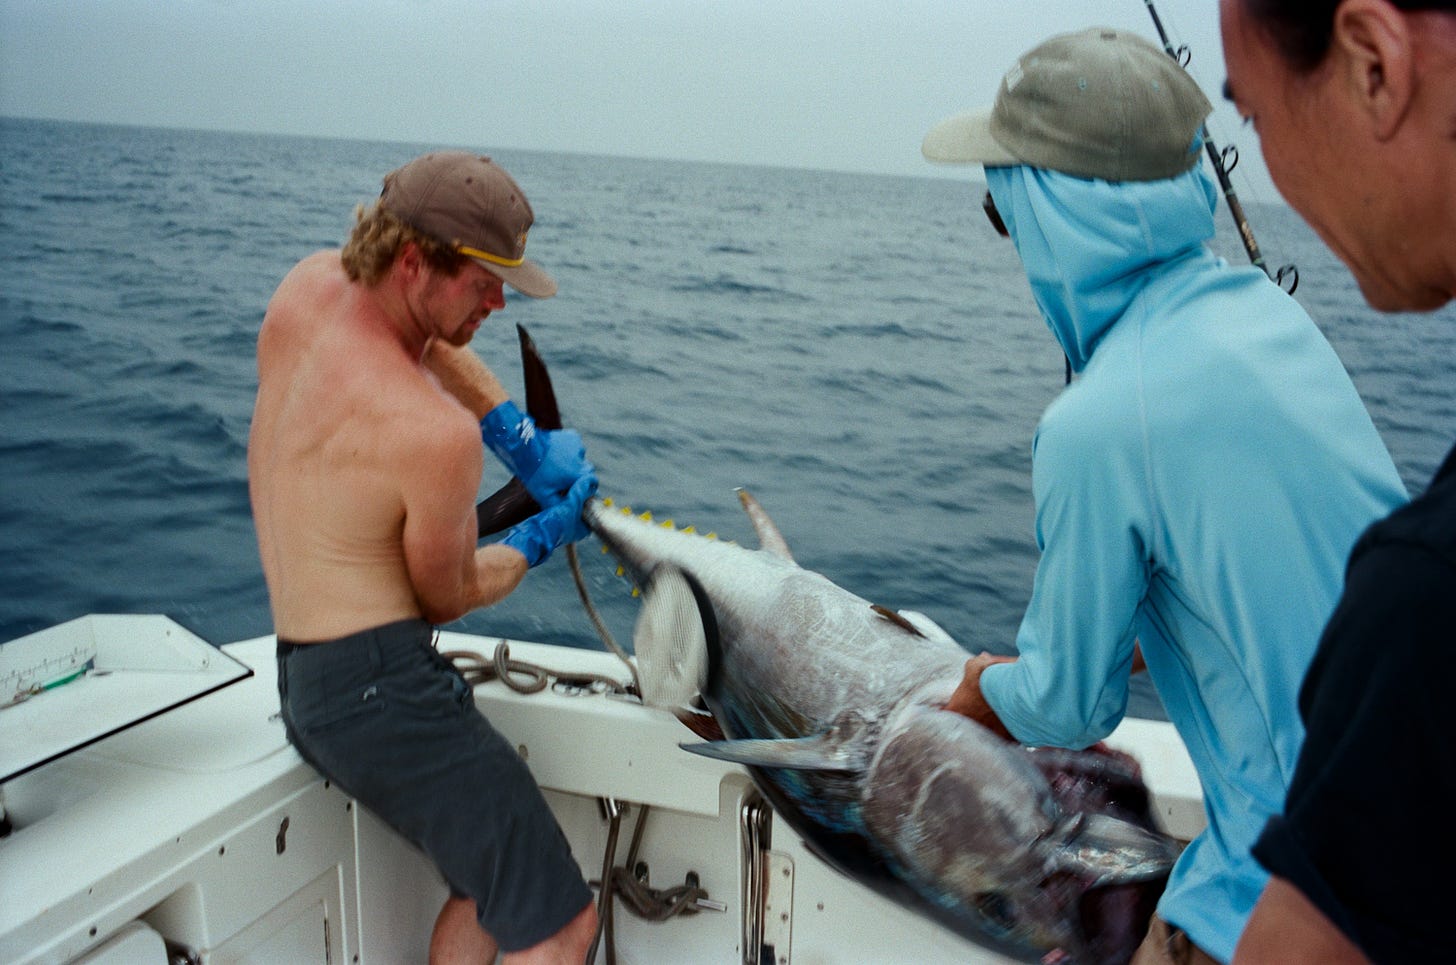 Getting the tuna onto the boat